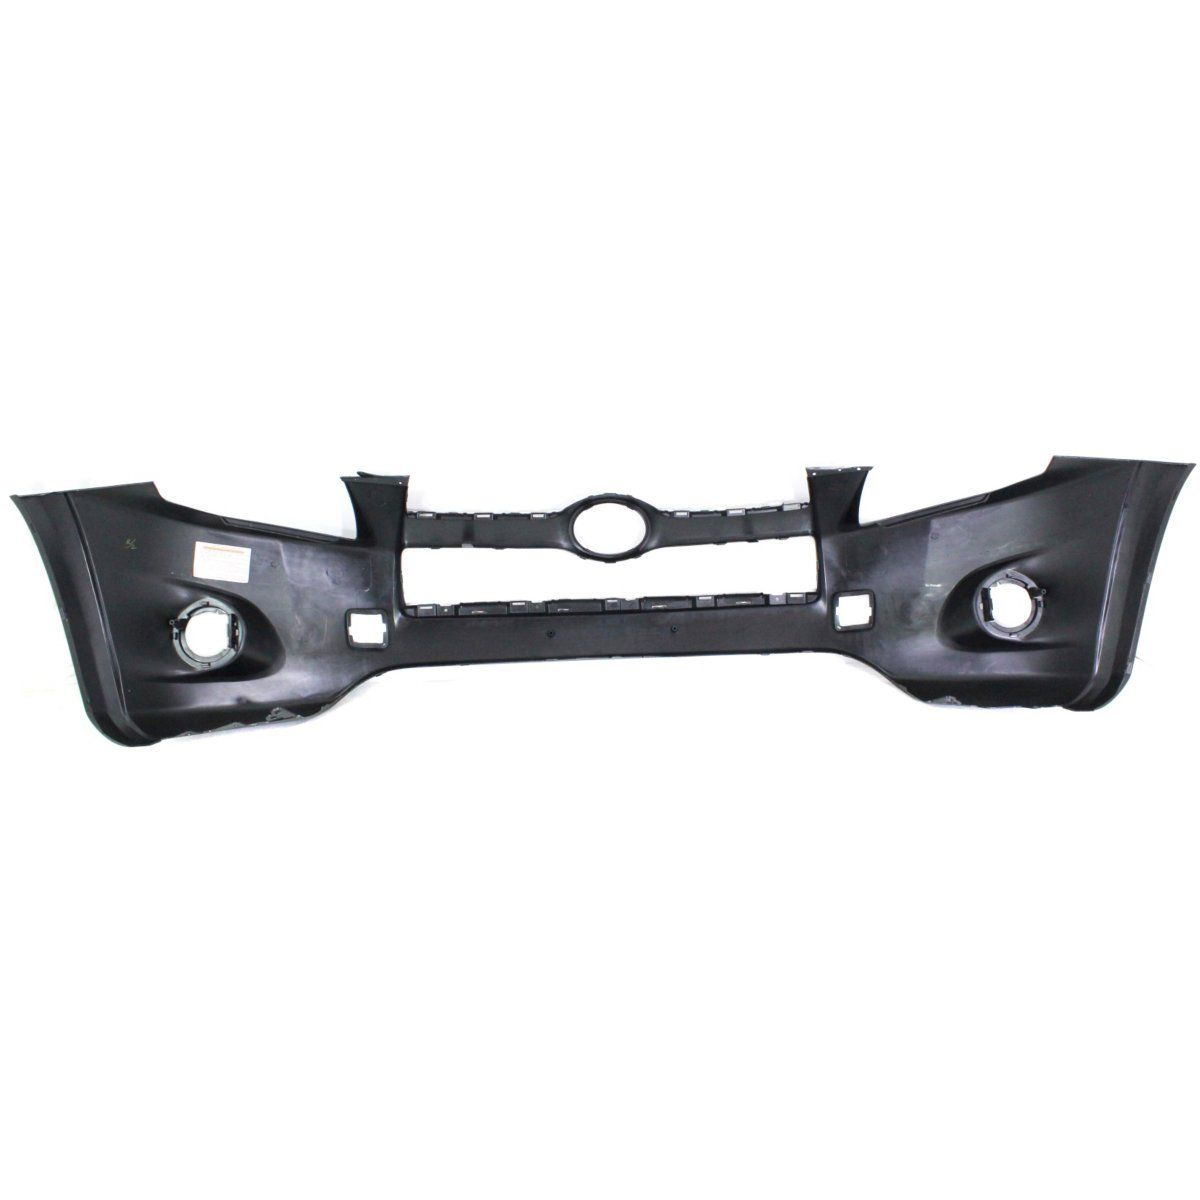 2009-2012 TOYOTA RAV4 FRONT Bumper Cover Painted to Match